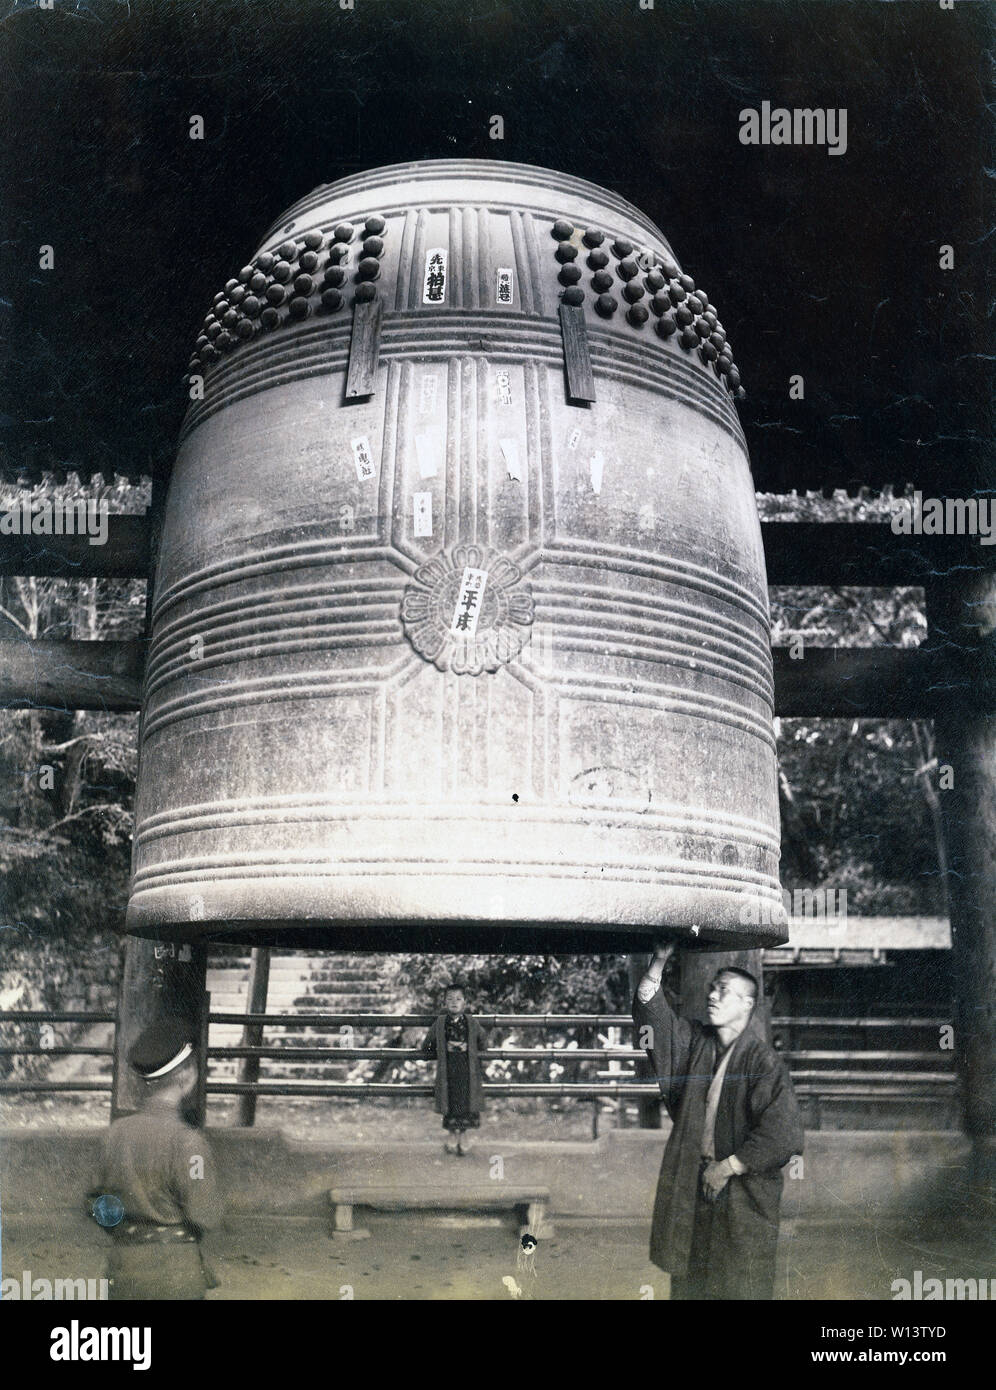 [ 1890s Japan - Large Temple Bell at Chion-in, Kyoto ] —   A man is stretching his arm to reach the bronze temple bell of Chion-in temple in Kyoto. The bell was cast in the early 17th century and was 4.5 meters high.  19th century vintage albumen photograph. Stock Photo